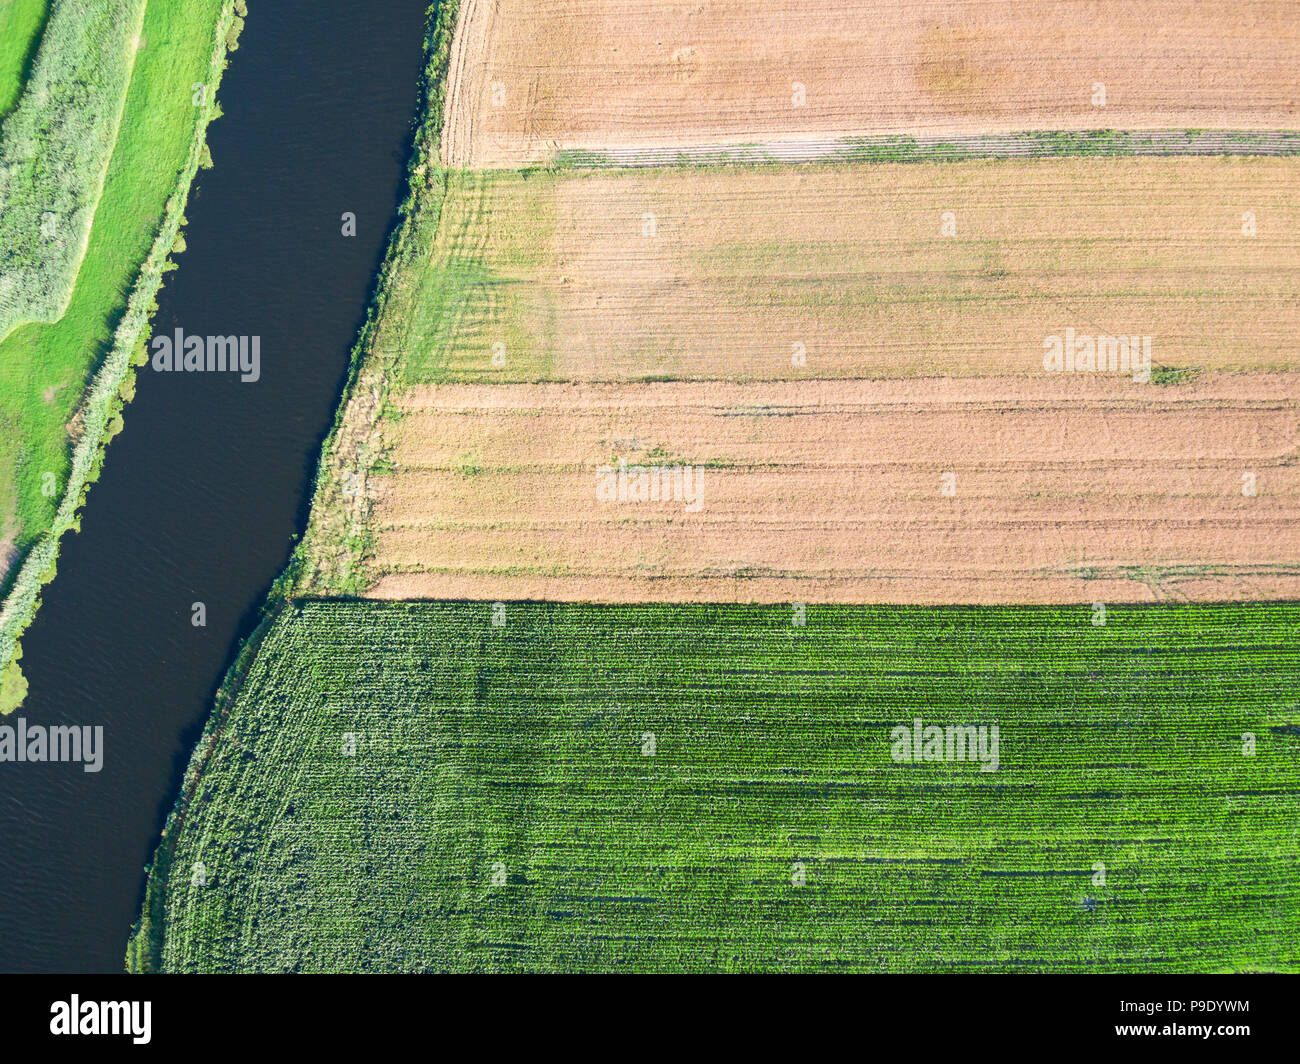 Fields by a river view directly from above Stock Photo